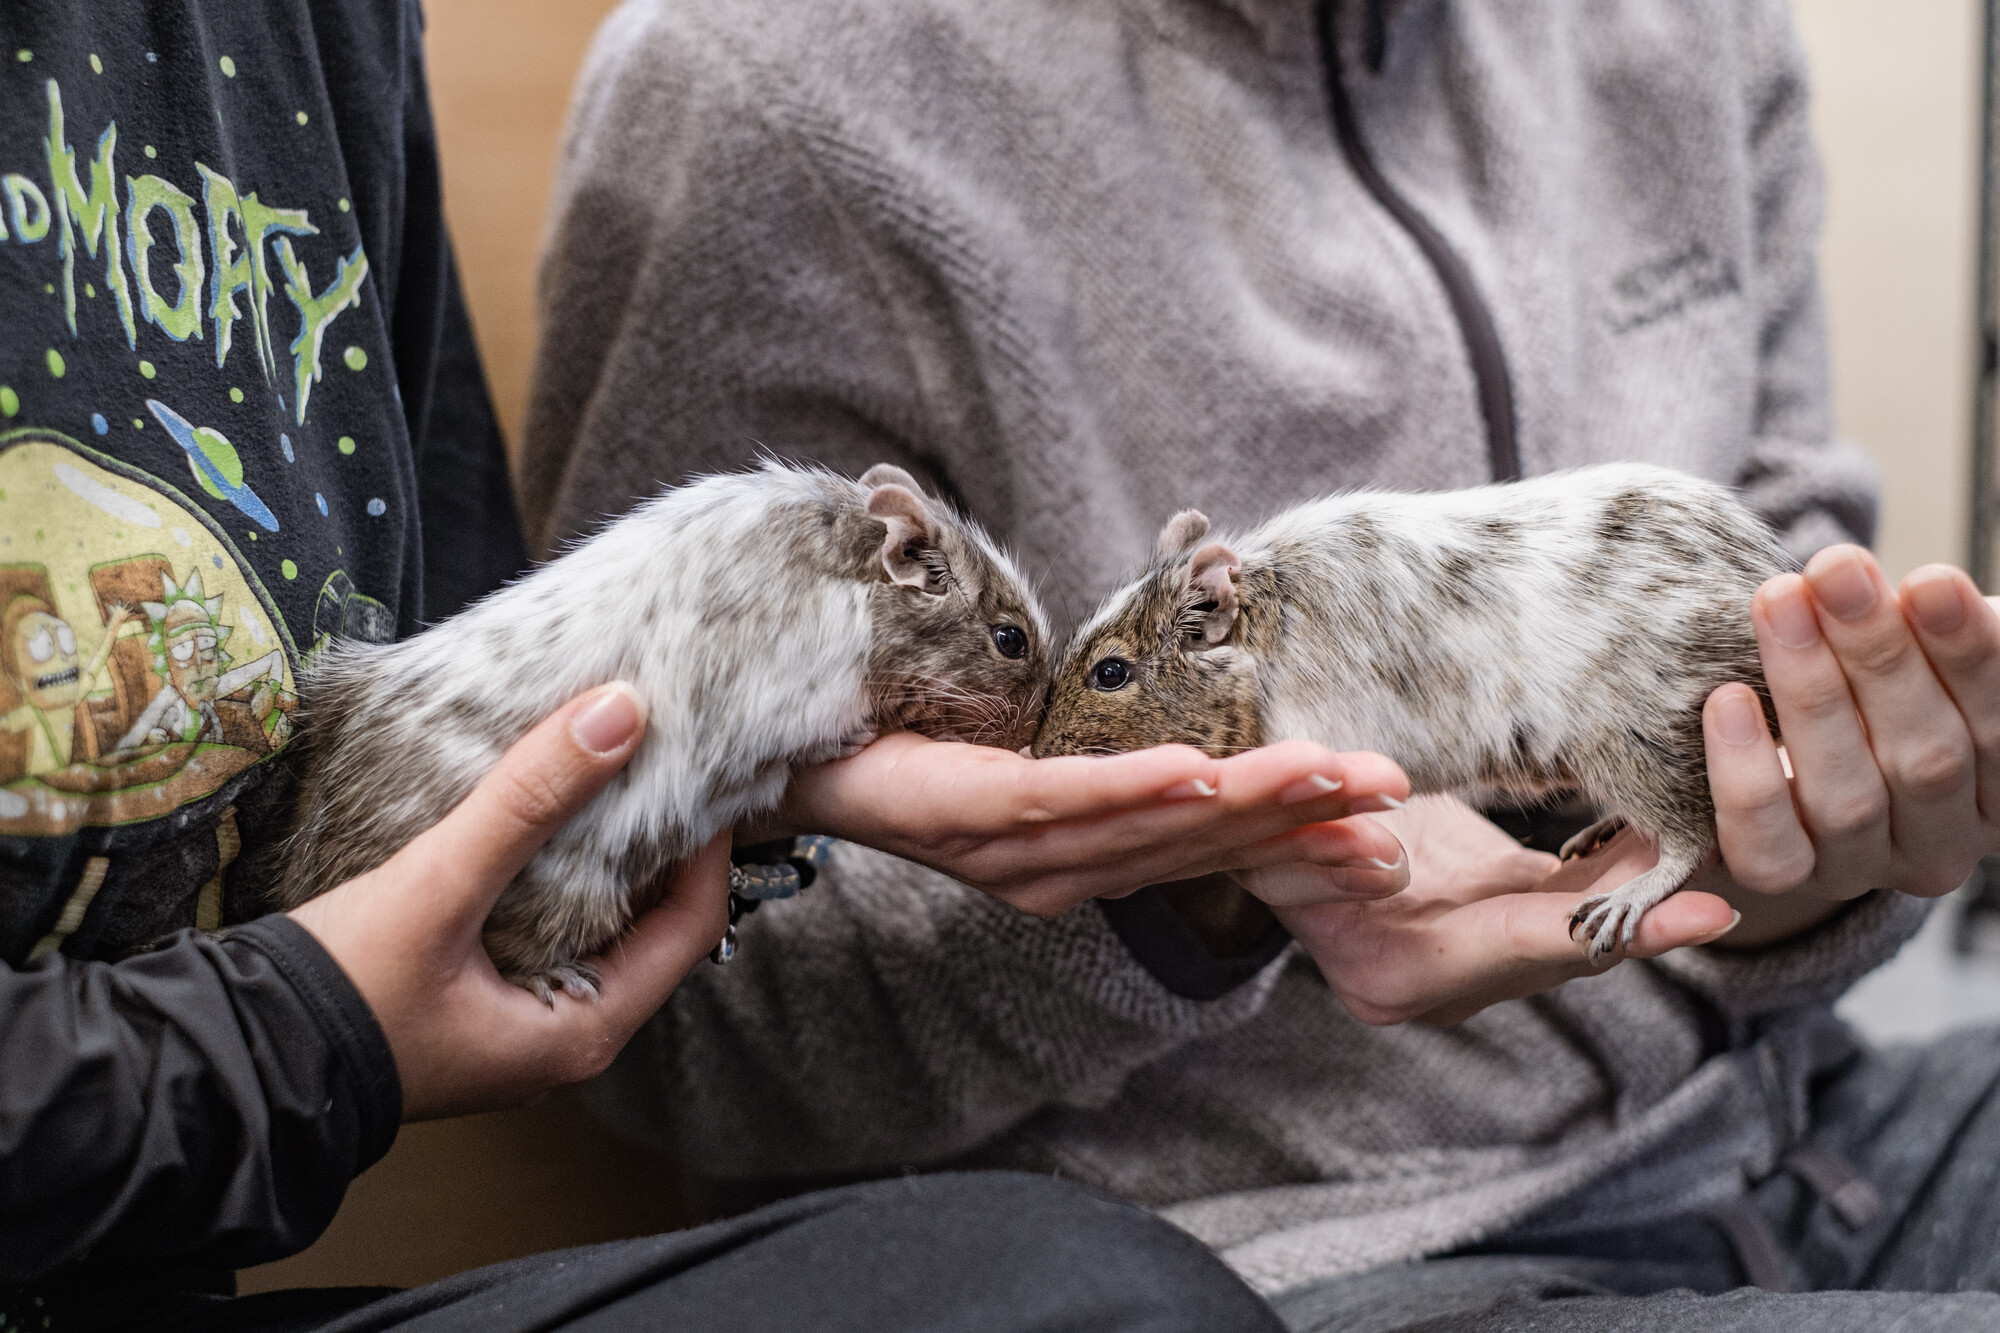 Two white and brown degus sit nose to nose on the hands of two young students